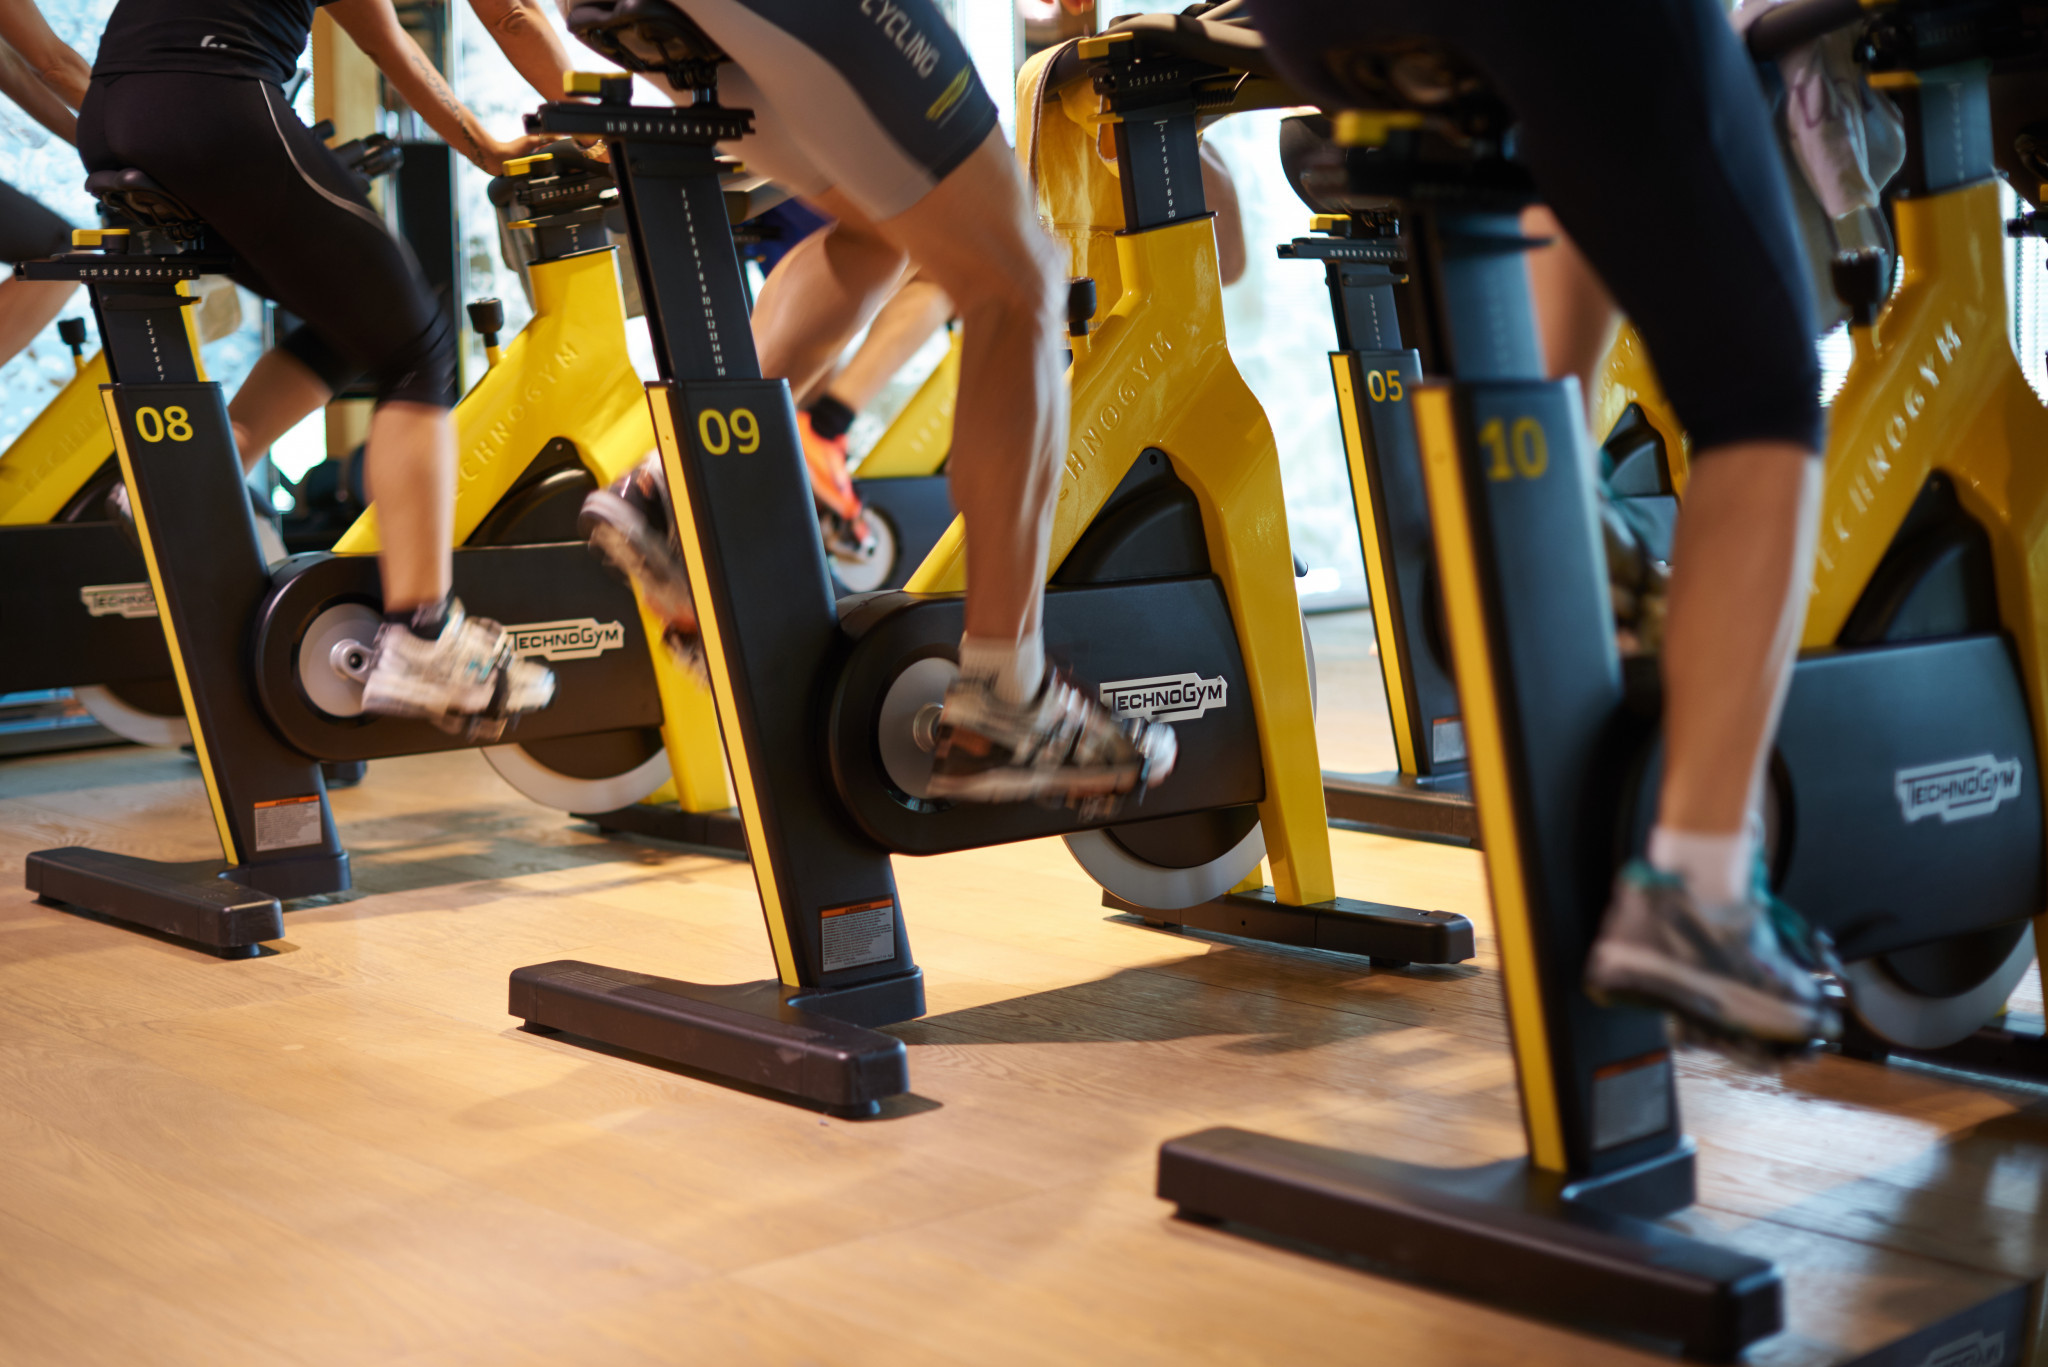 Technogym has vowed to aid British university sport with "innovative solutions, knowledge, and support" ©Getty Images